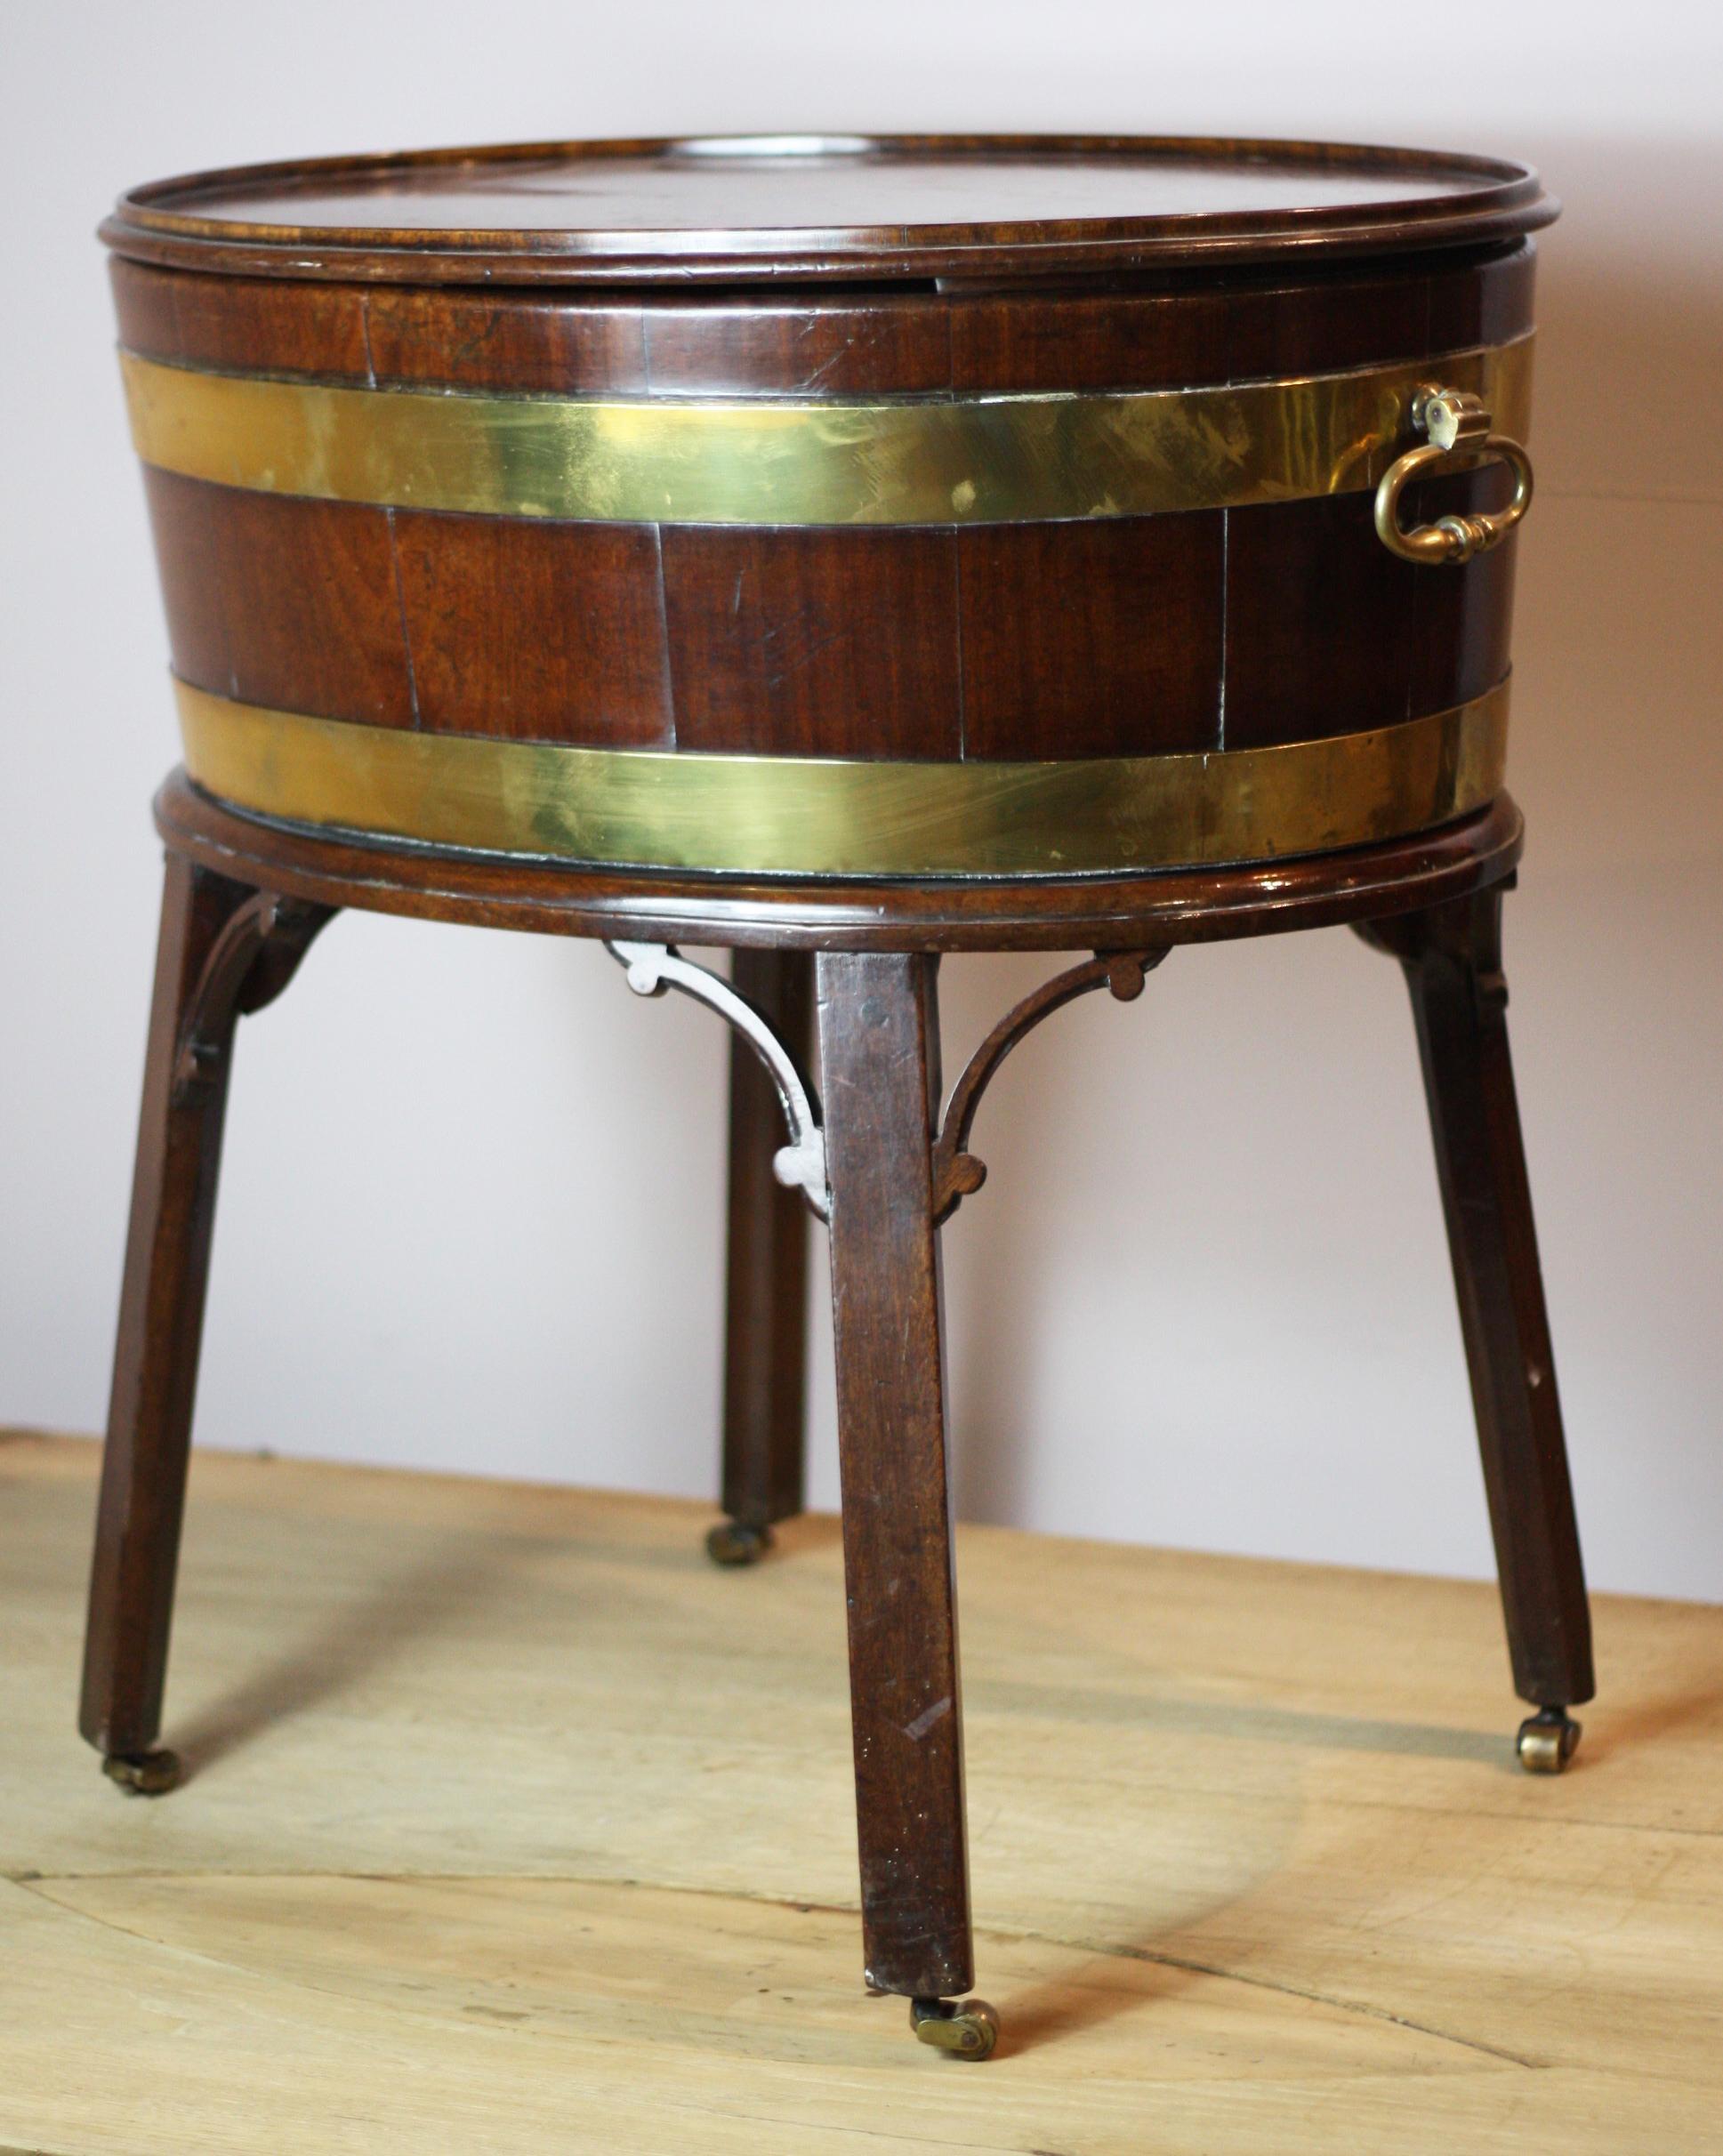 A fine George III mahogany oval shaped wine cooler, with brass bands and carrying handles, on mahogany stand with small casters, also comes with later lid for use as a side table or would also make a wonderful planter, circa 1790.